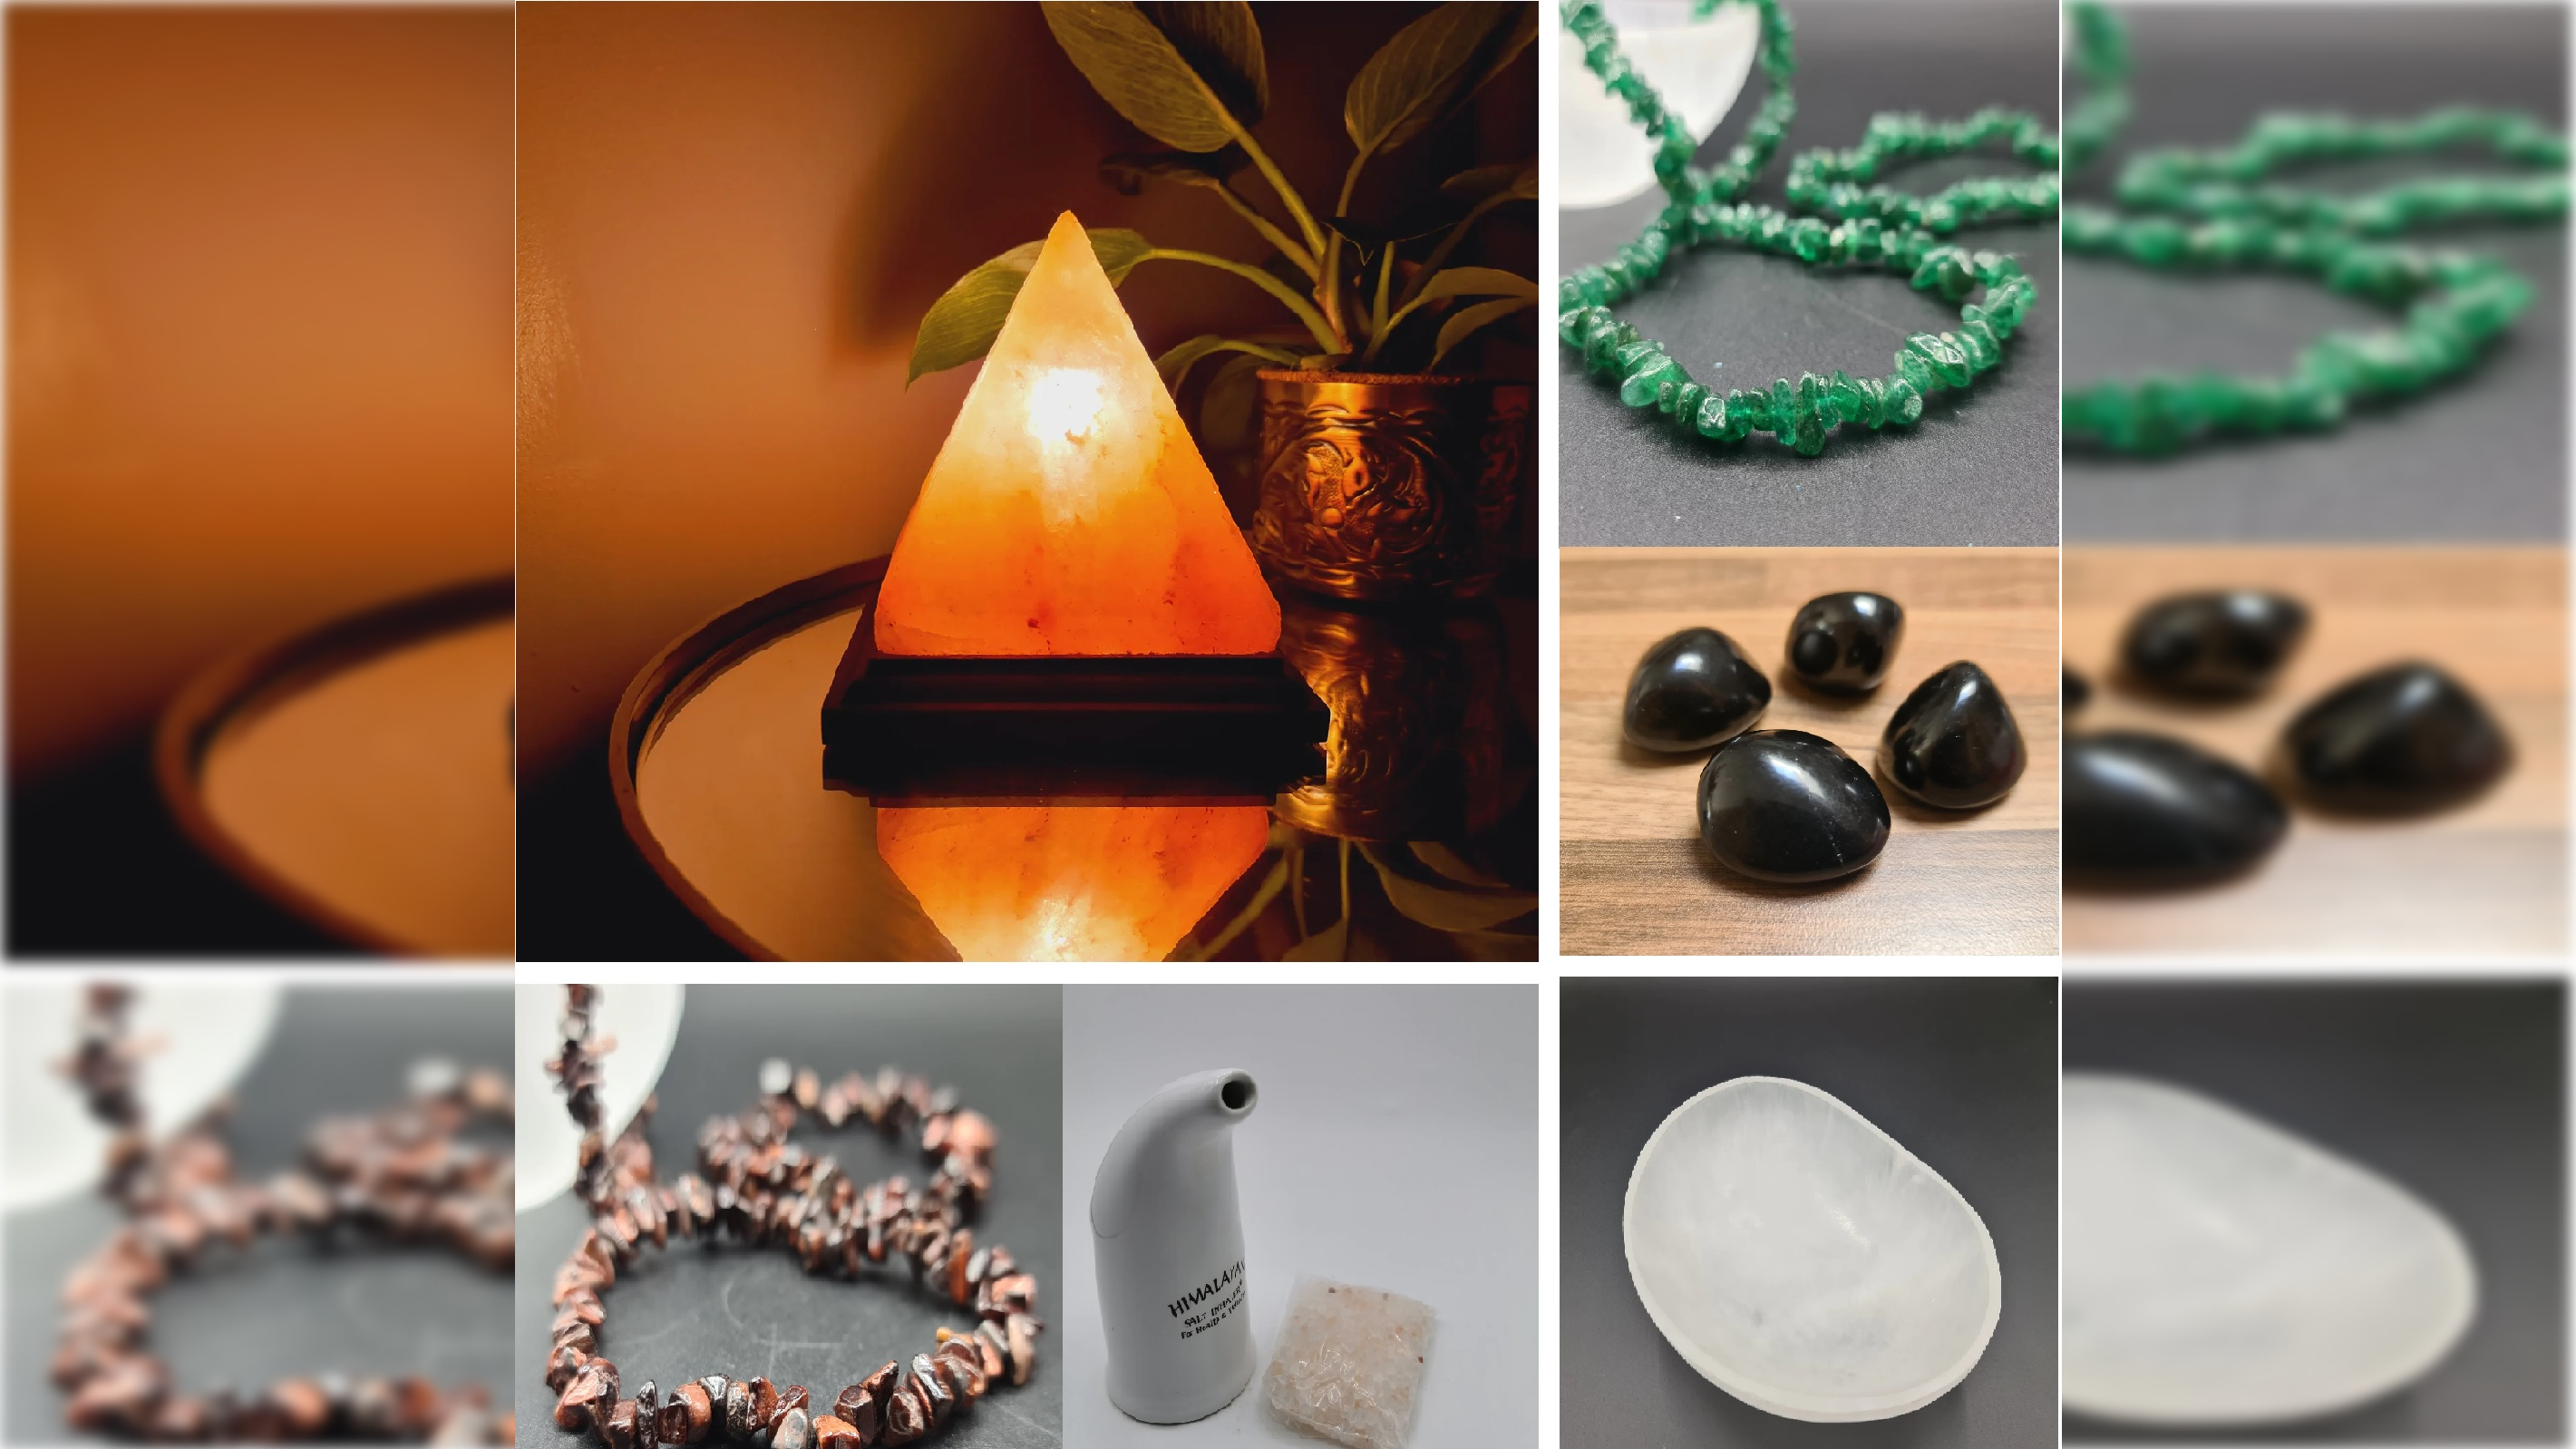 A Collage of Budget Friendly Gemstone Gifts